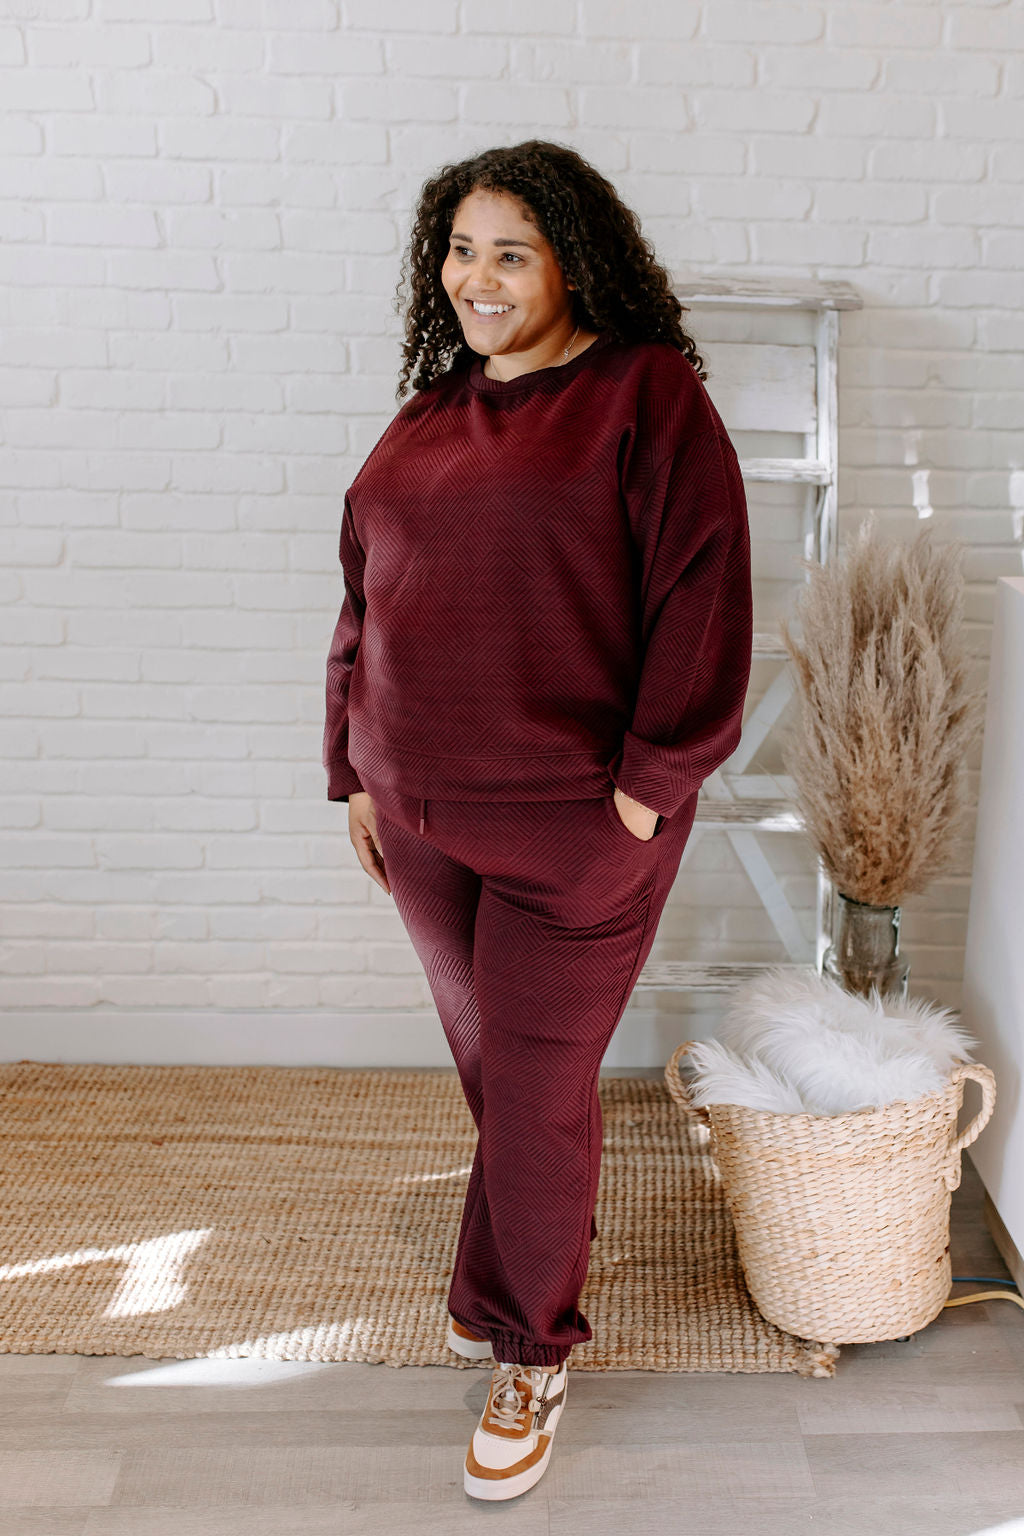 Willa in Textured Burgundy Joggers